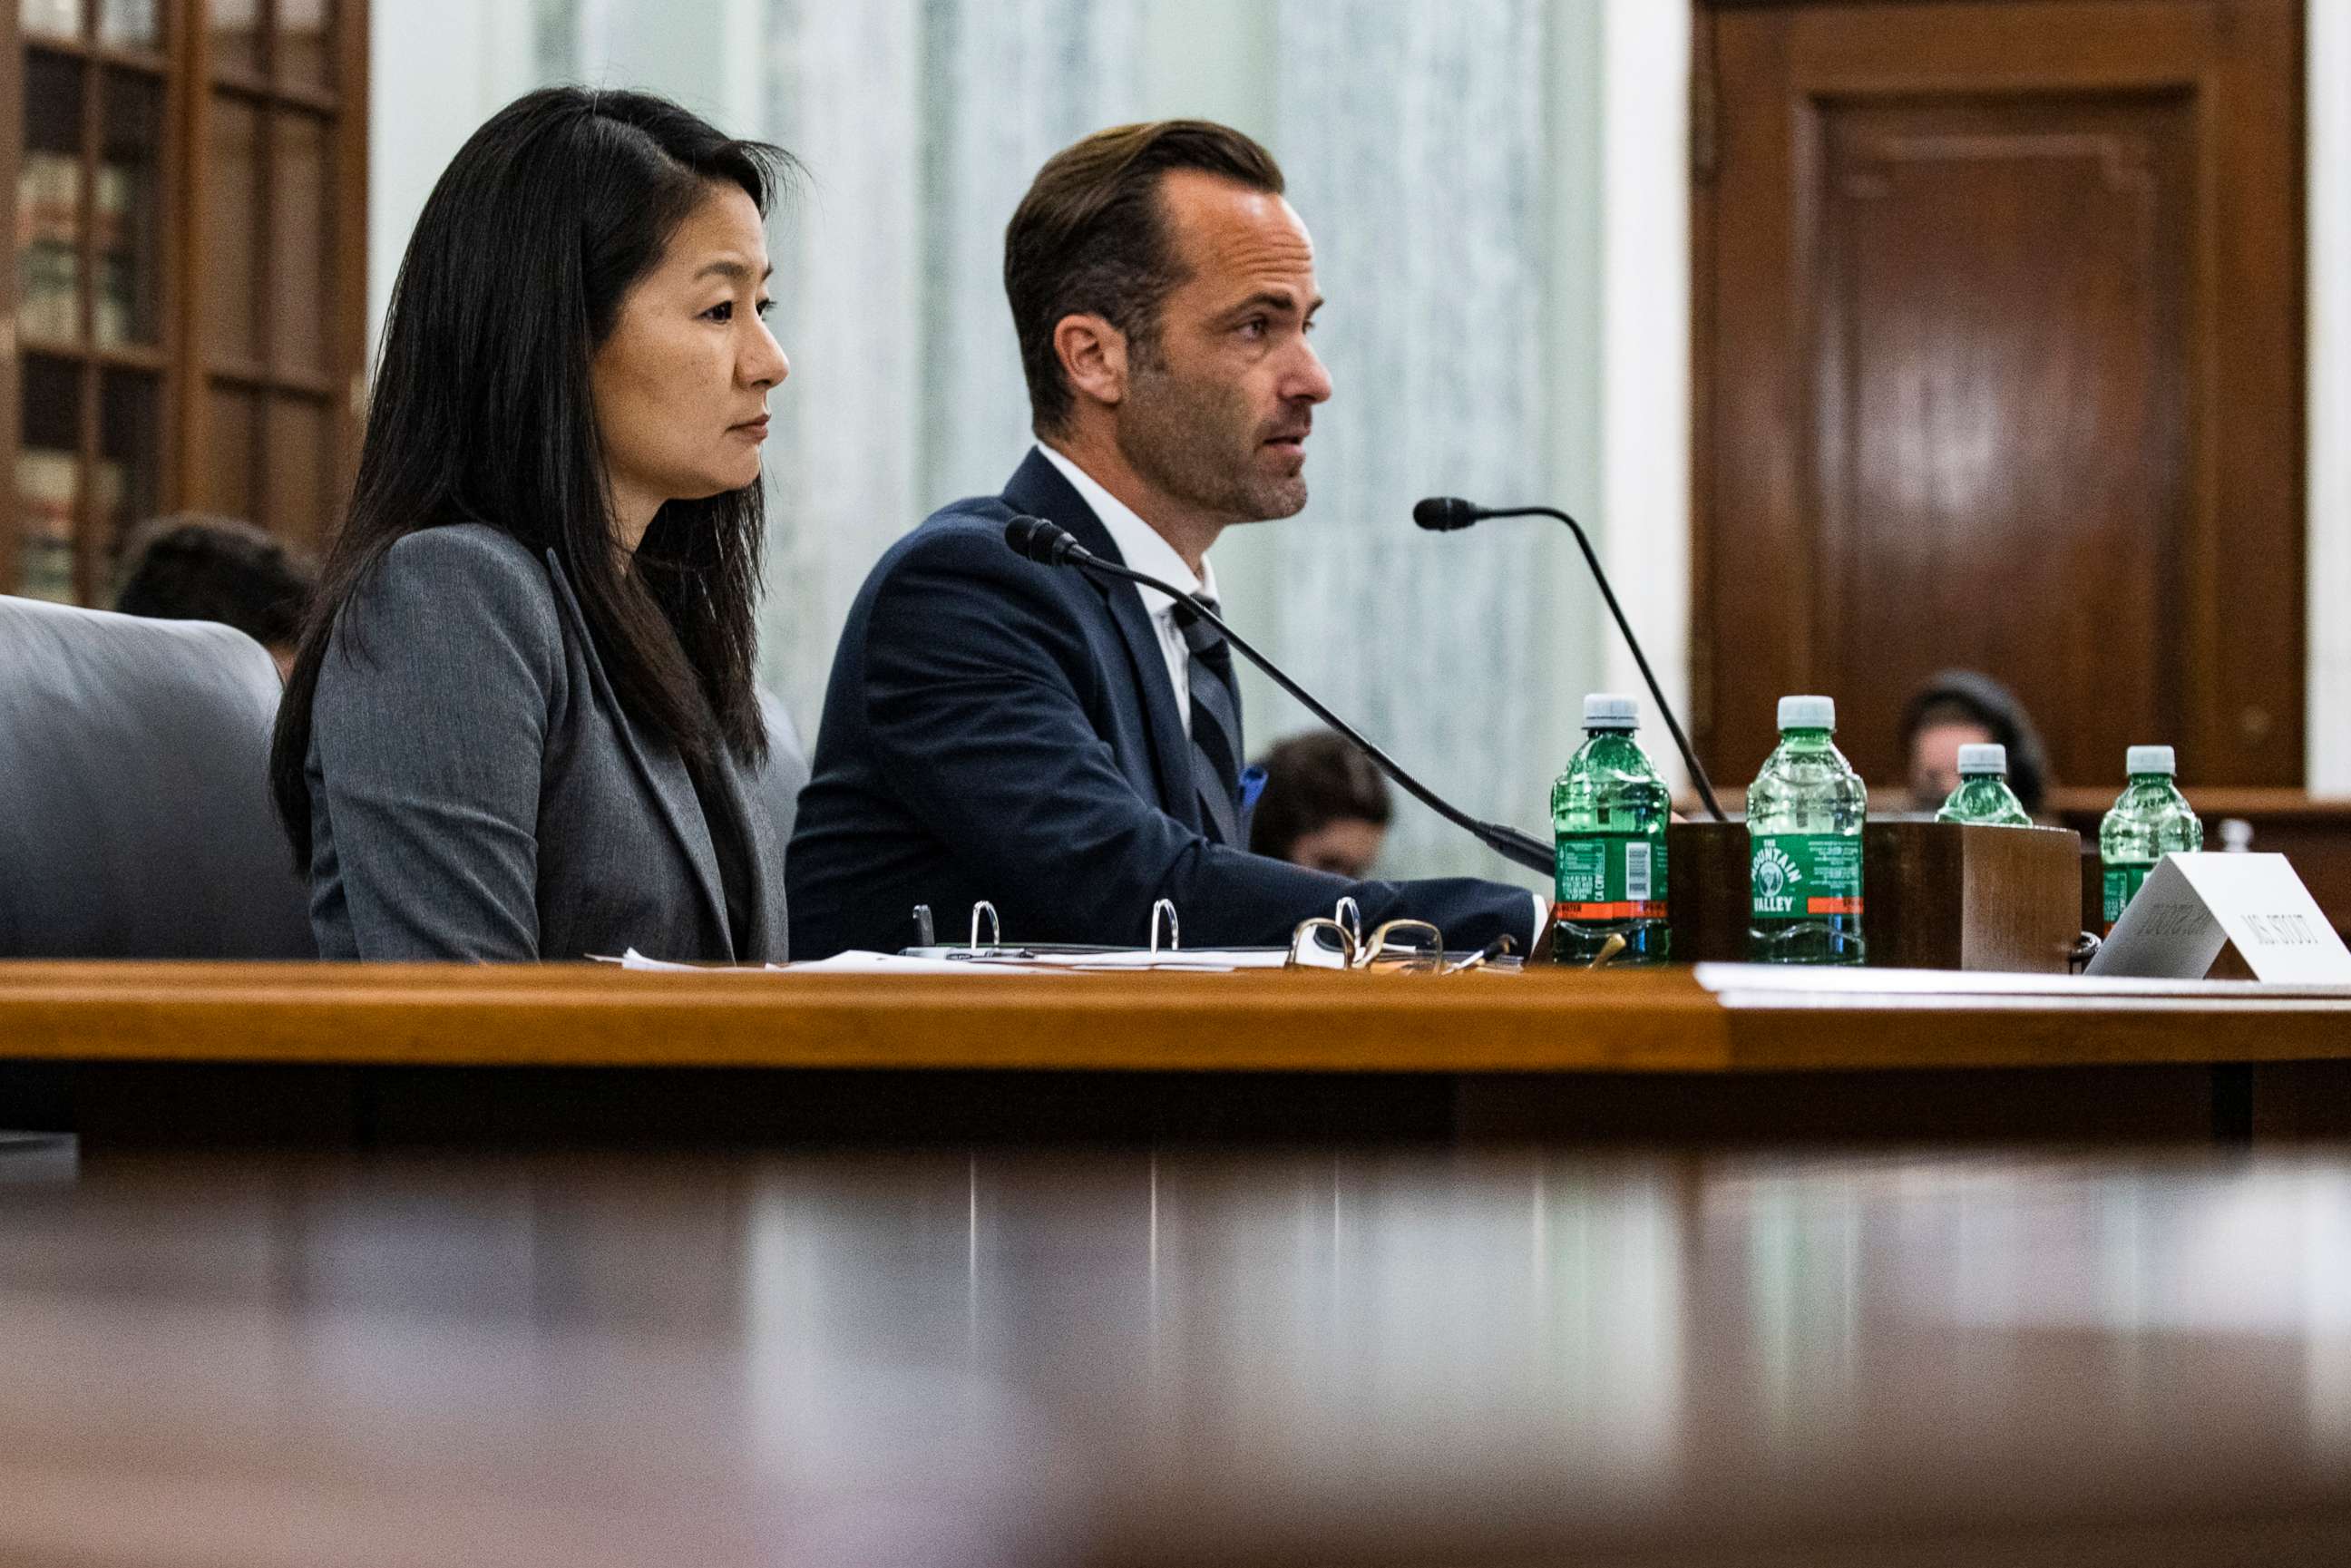 PHOTO: Jennifer Stout (L), Vice President of Global Public Policy at Snap Inc., and Michael Beckerman (R), Vice President and Head of Public Policy at TikTok, testify before a Senate Subcommittee, Oct. 26, 2021, in Washington, D.C. 